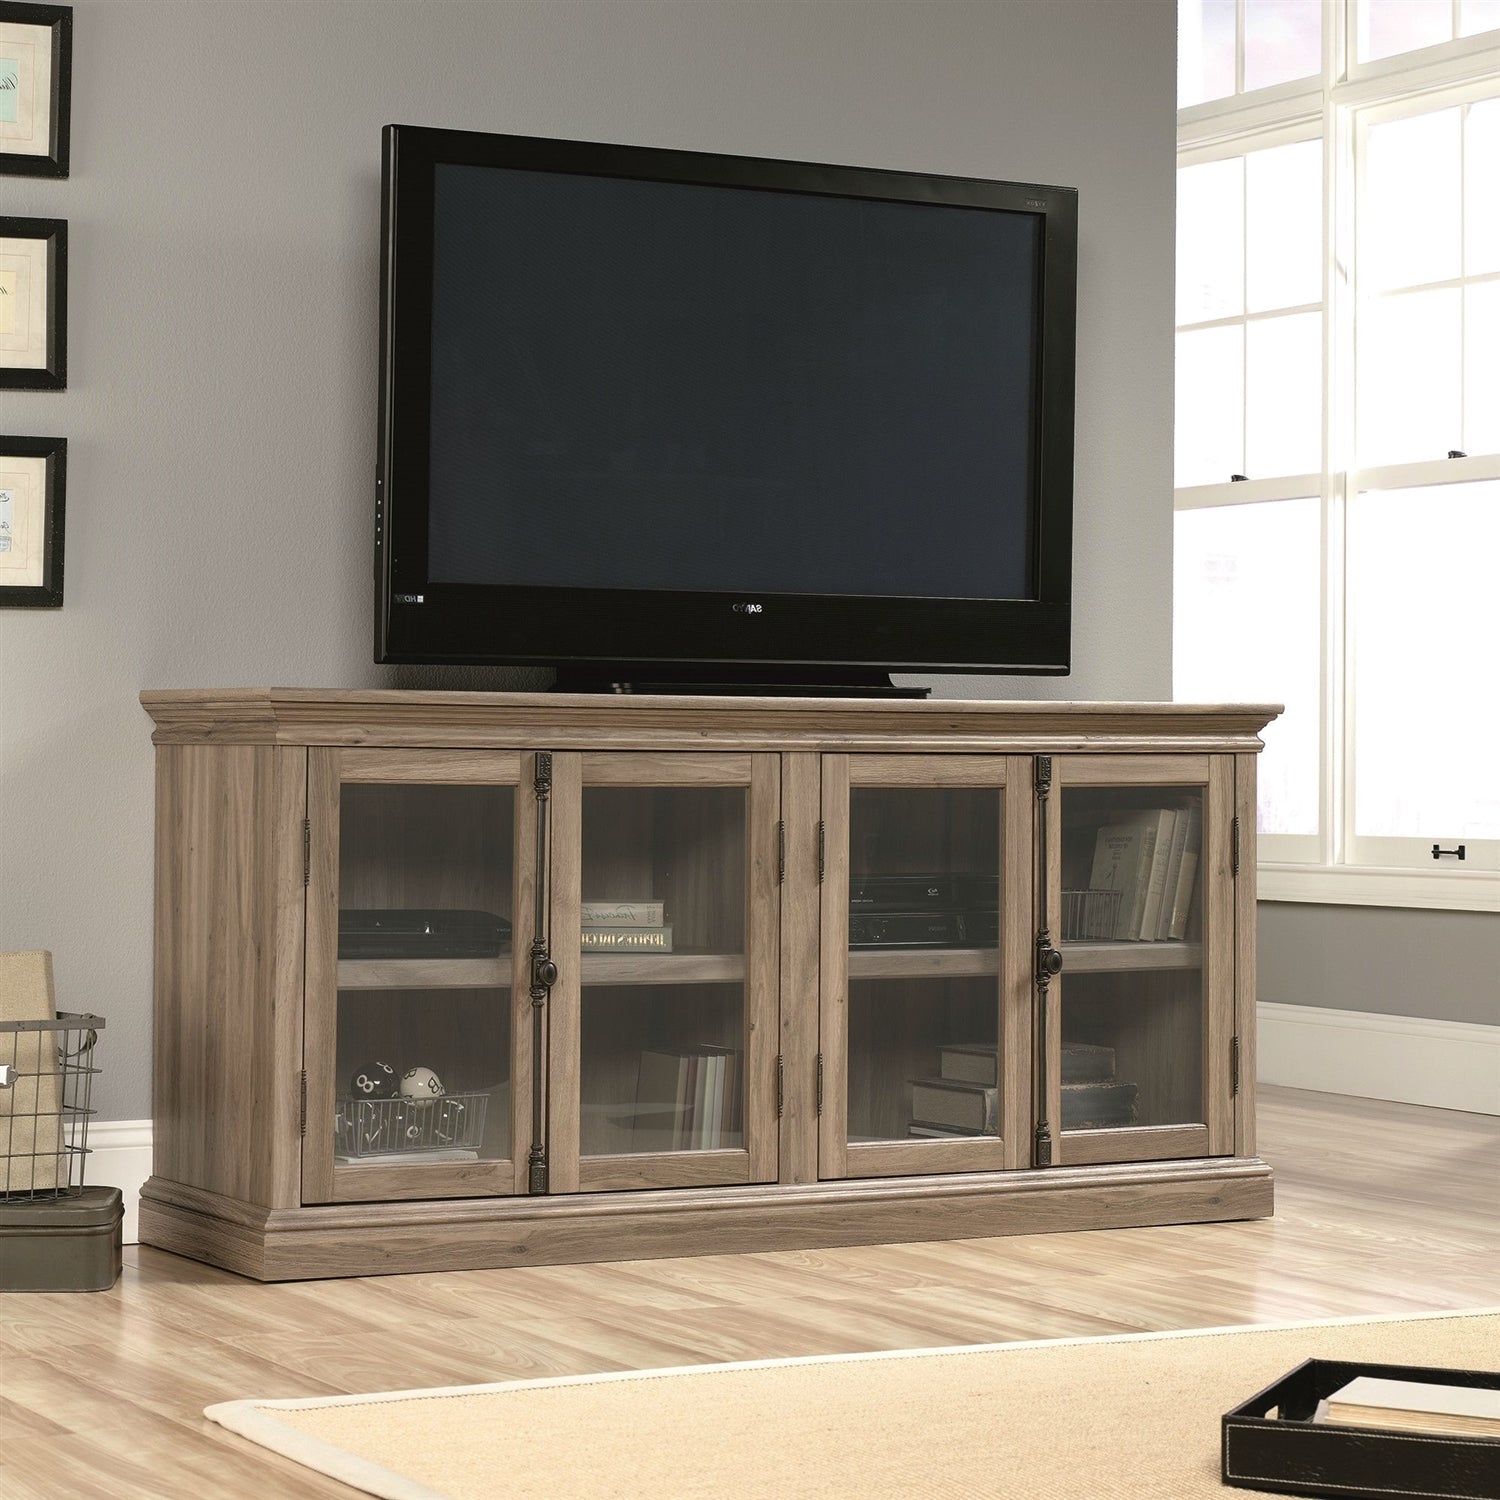 Living Room > TV Stands And Entertainment Centers - Salt Oak Wood Finish TV Stand With Tempered Glass Doors - Fits Up To 80-inch TV